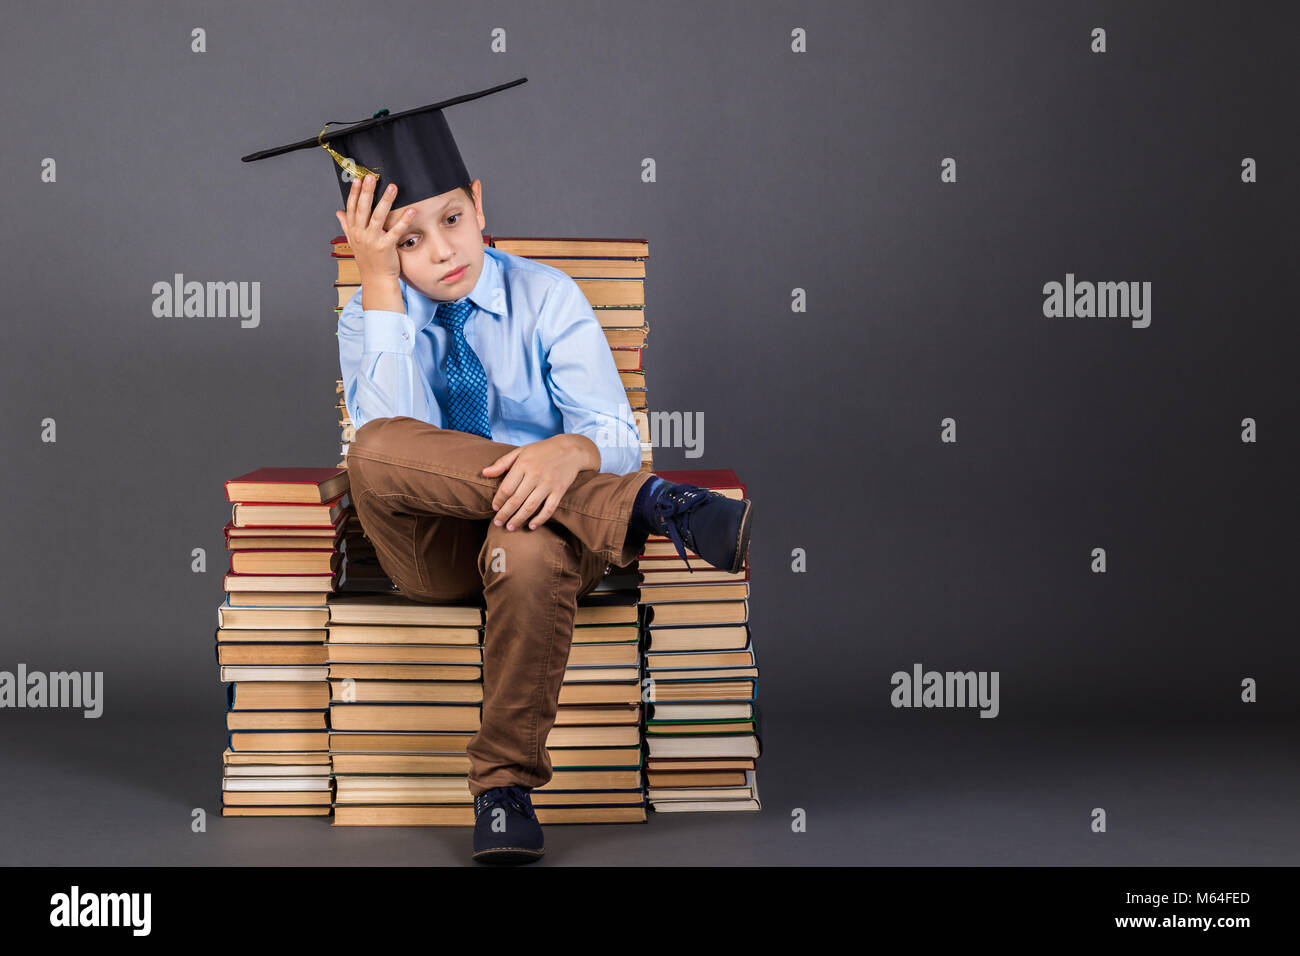 Education concept. Pensive boy sitting on a throne from books Stock Photo